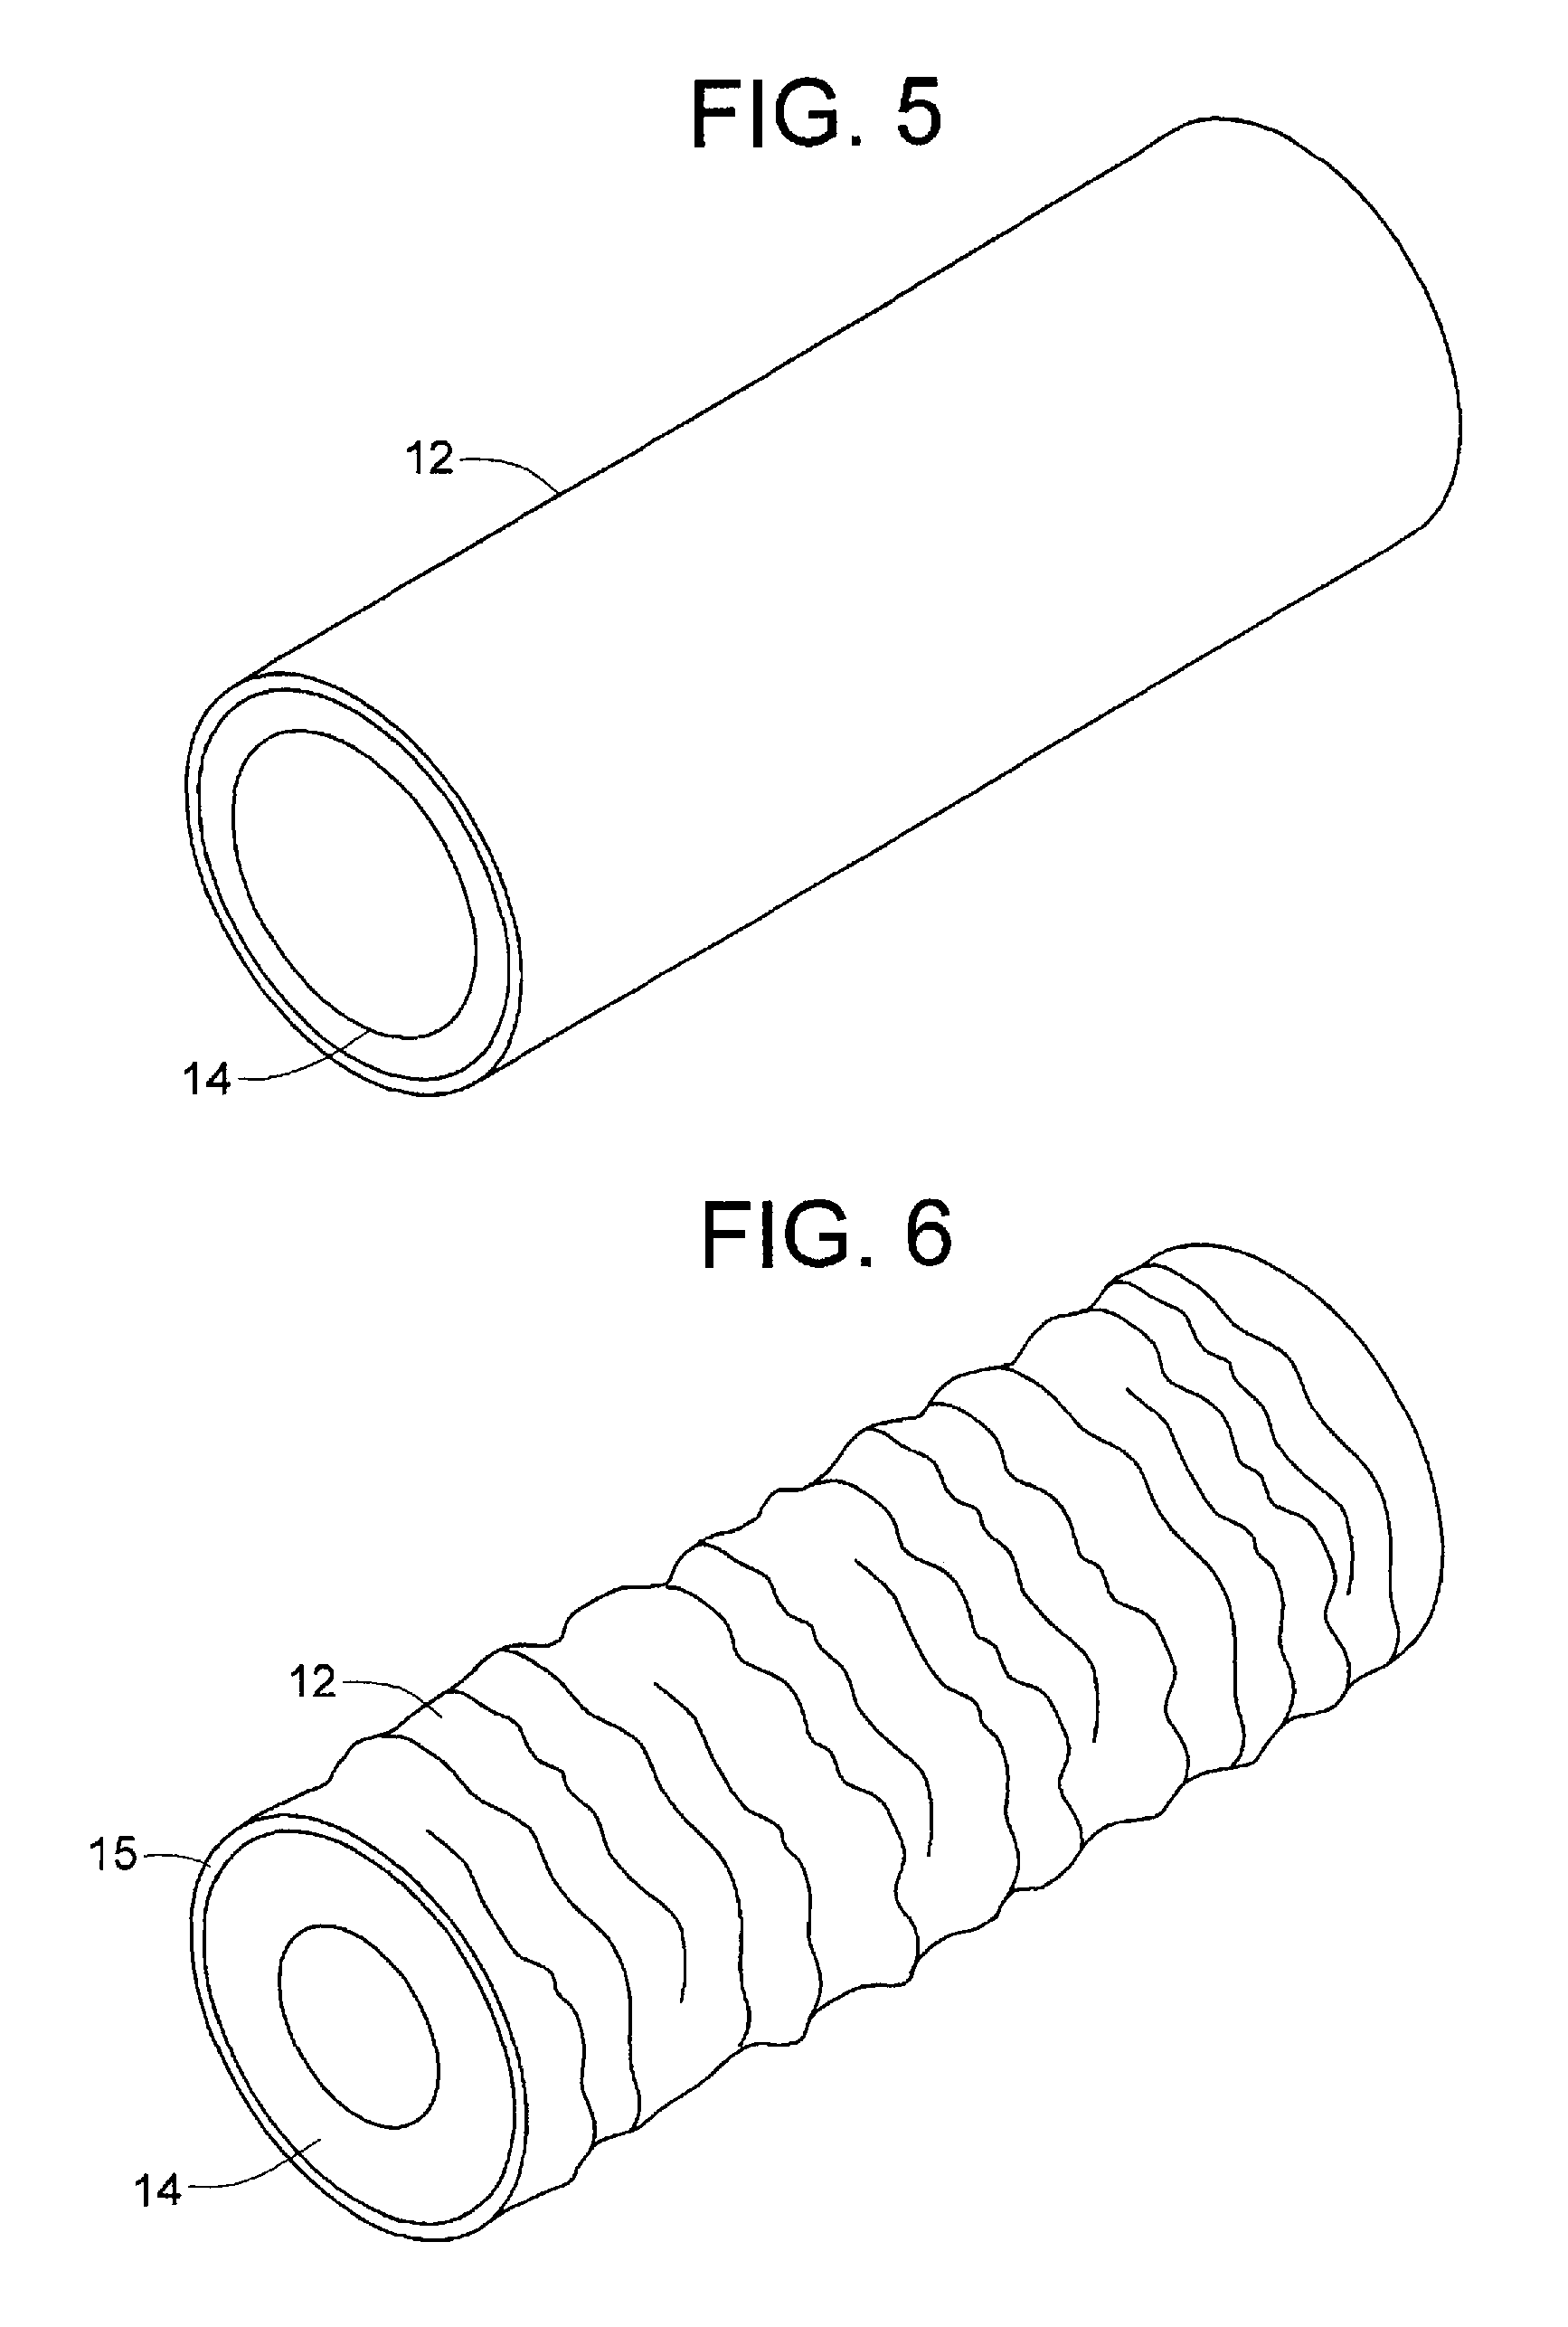 Expandable and contractible hose